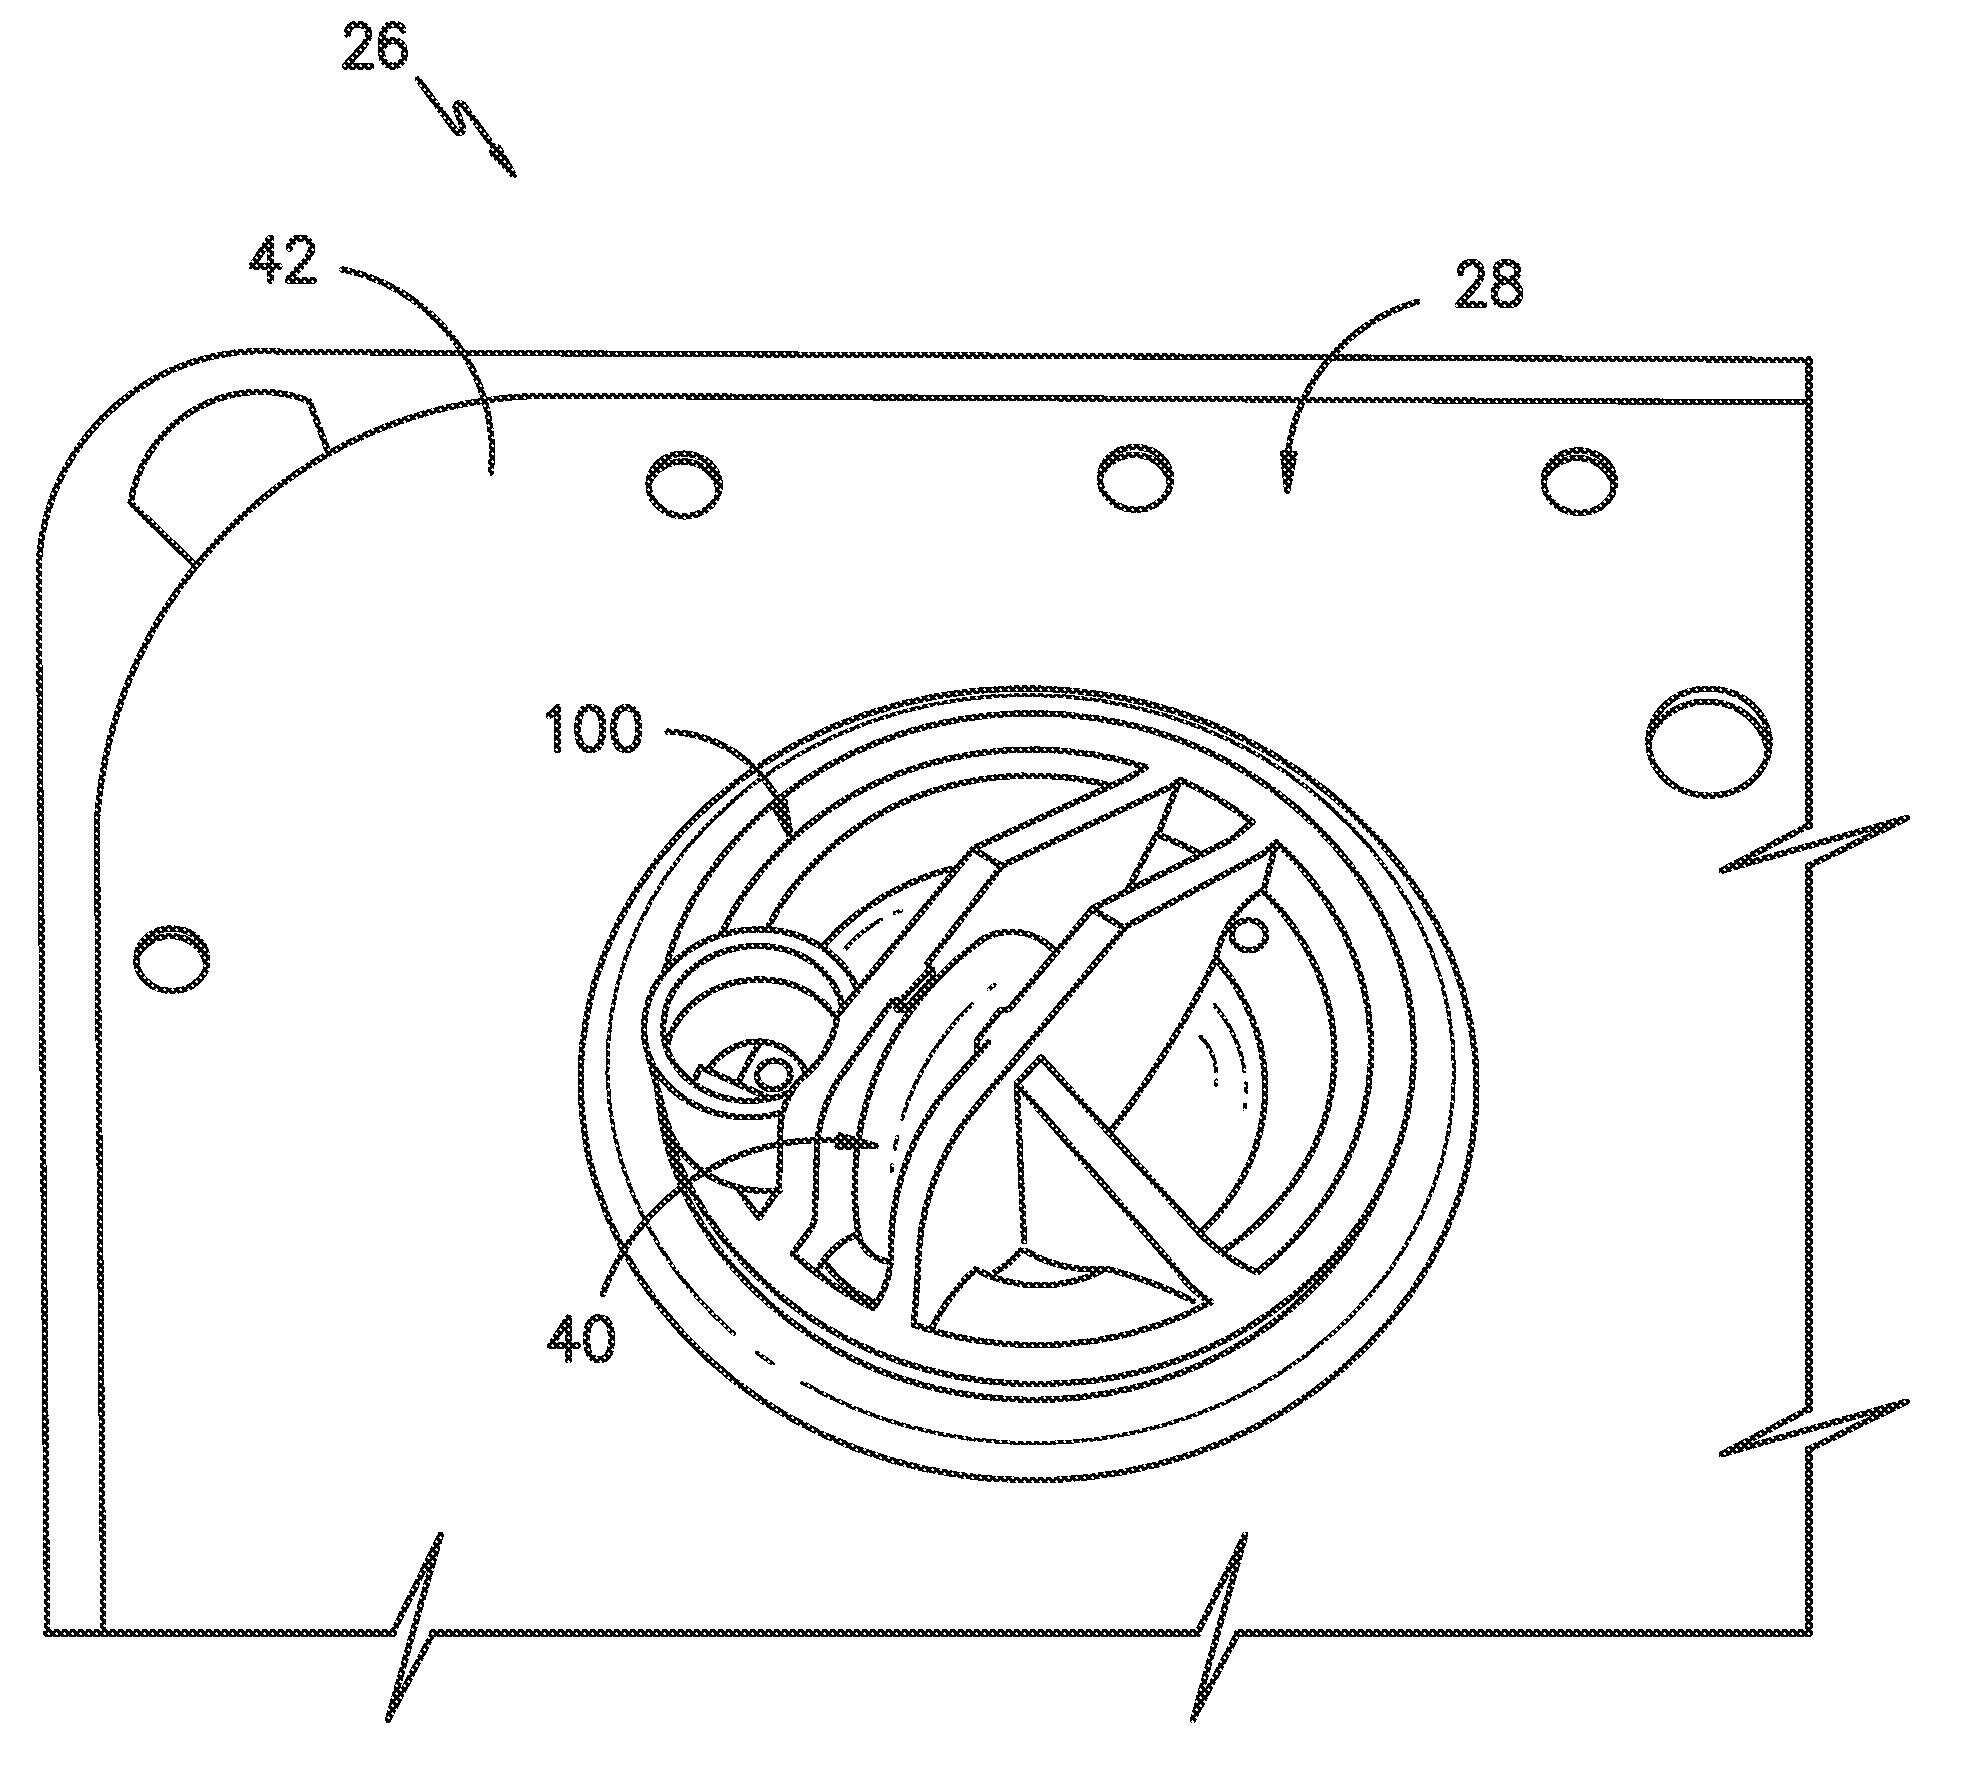 Ball joint for a washing machine suspension system